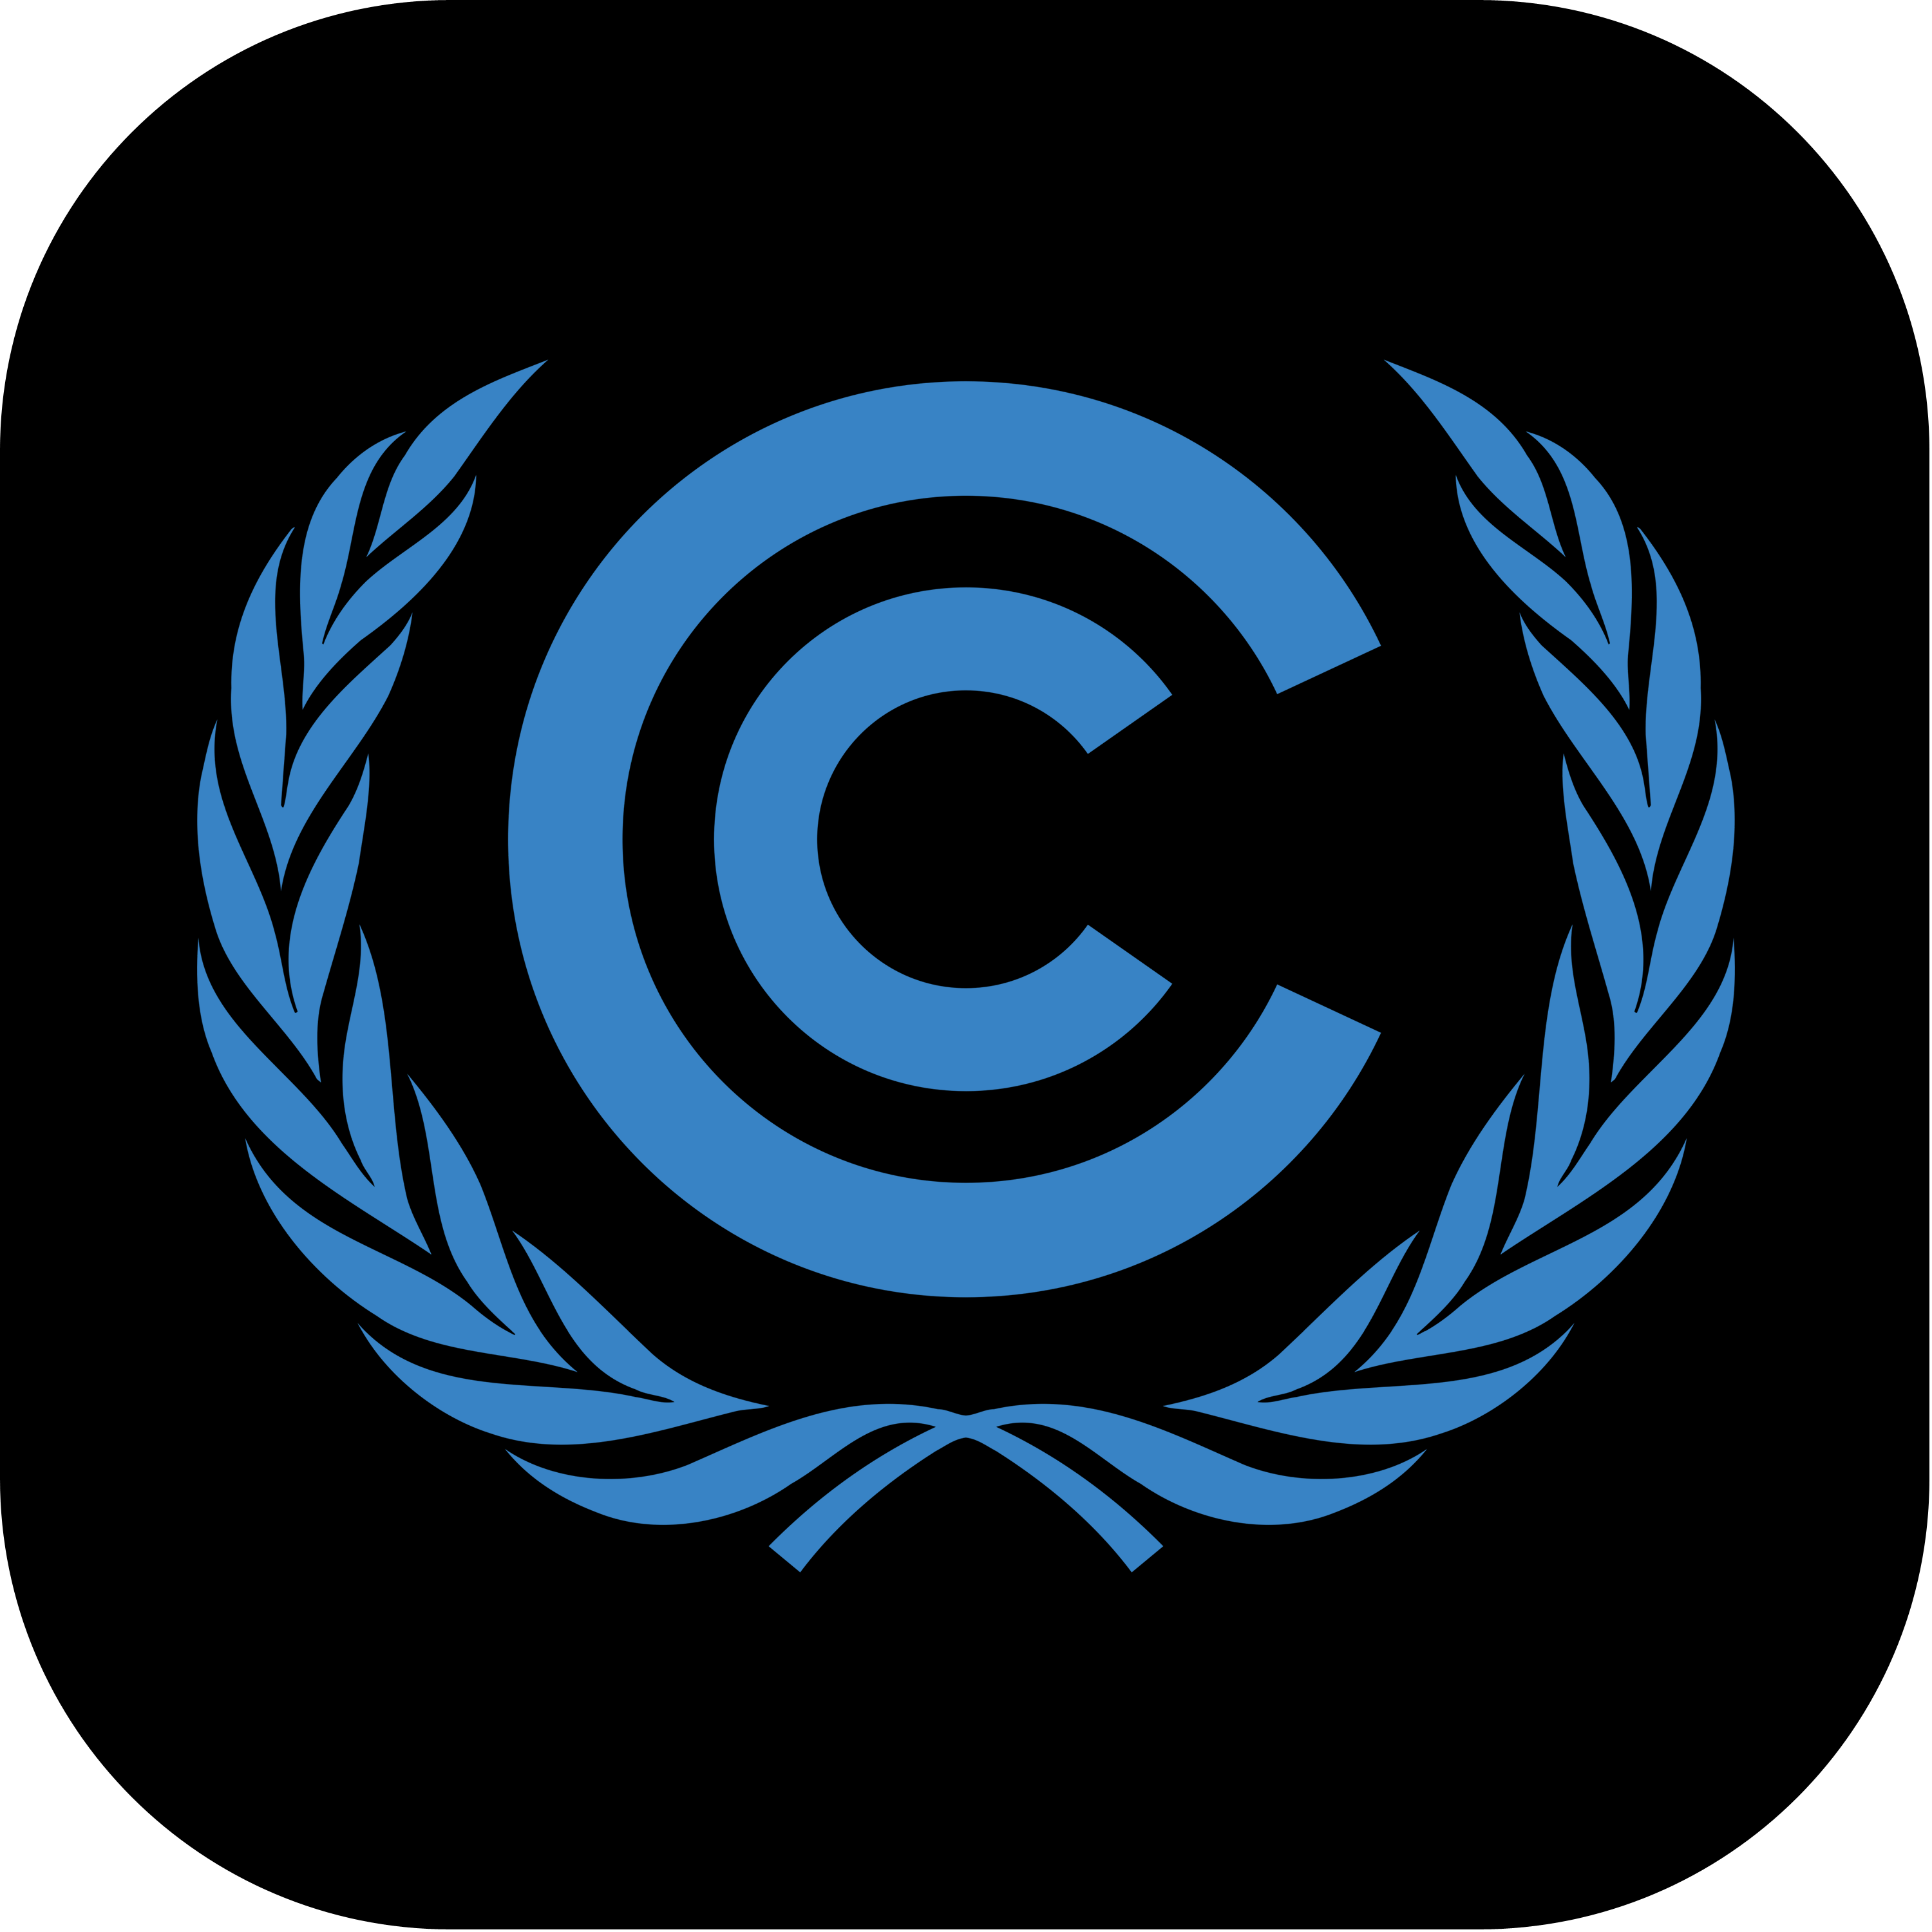 United Nations Climate Change Conference Logo Transparent Photo